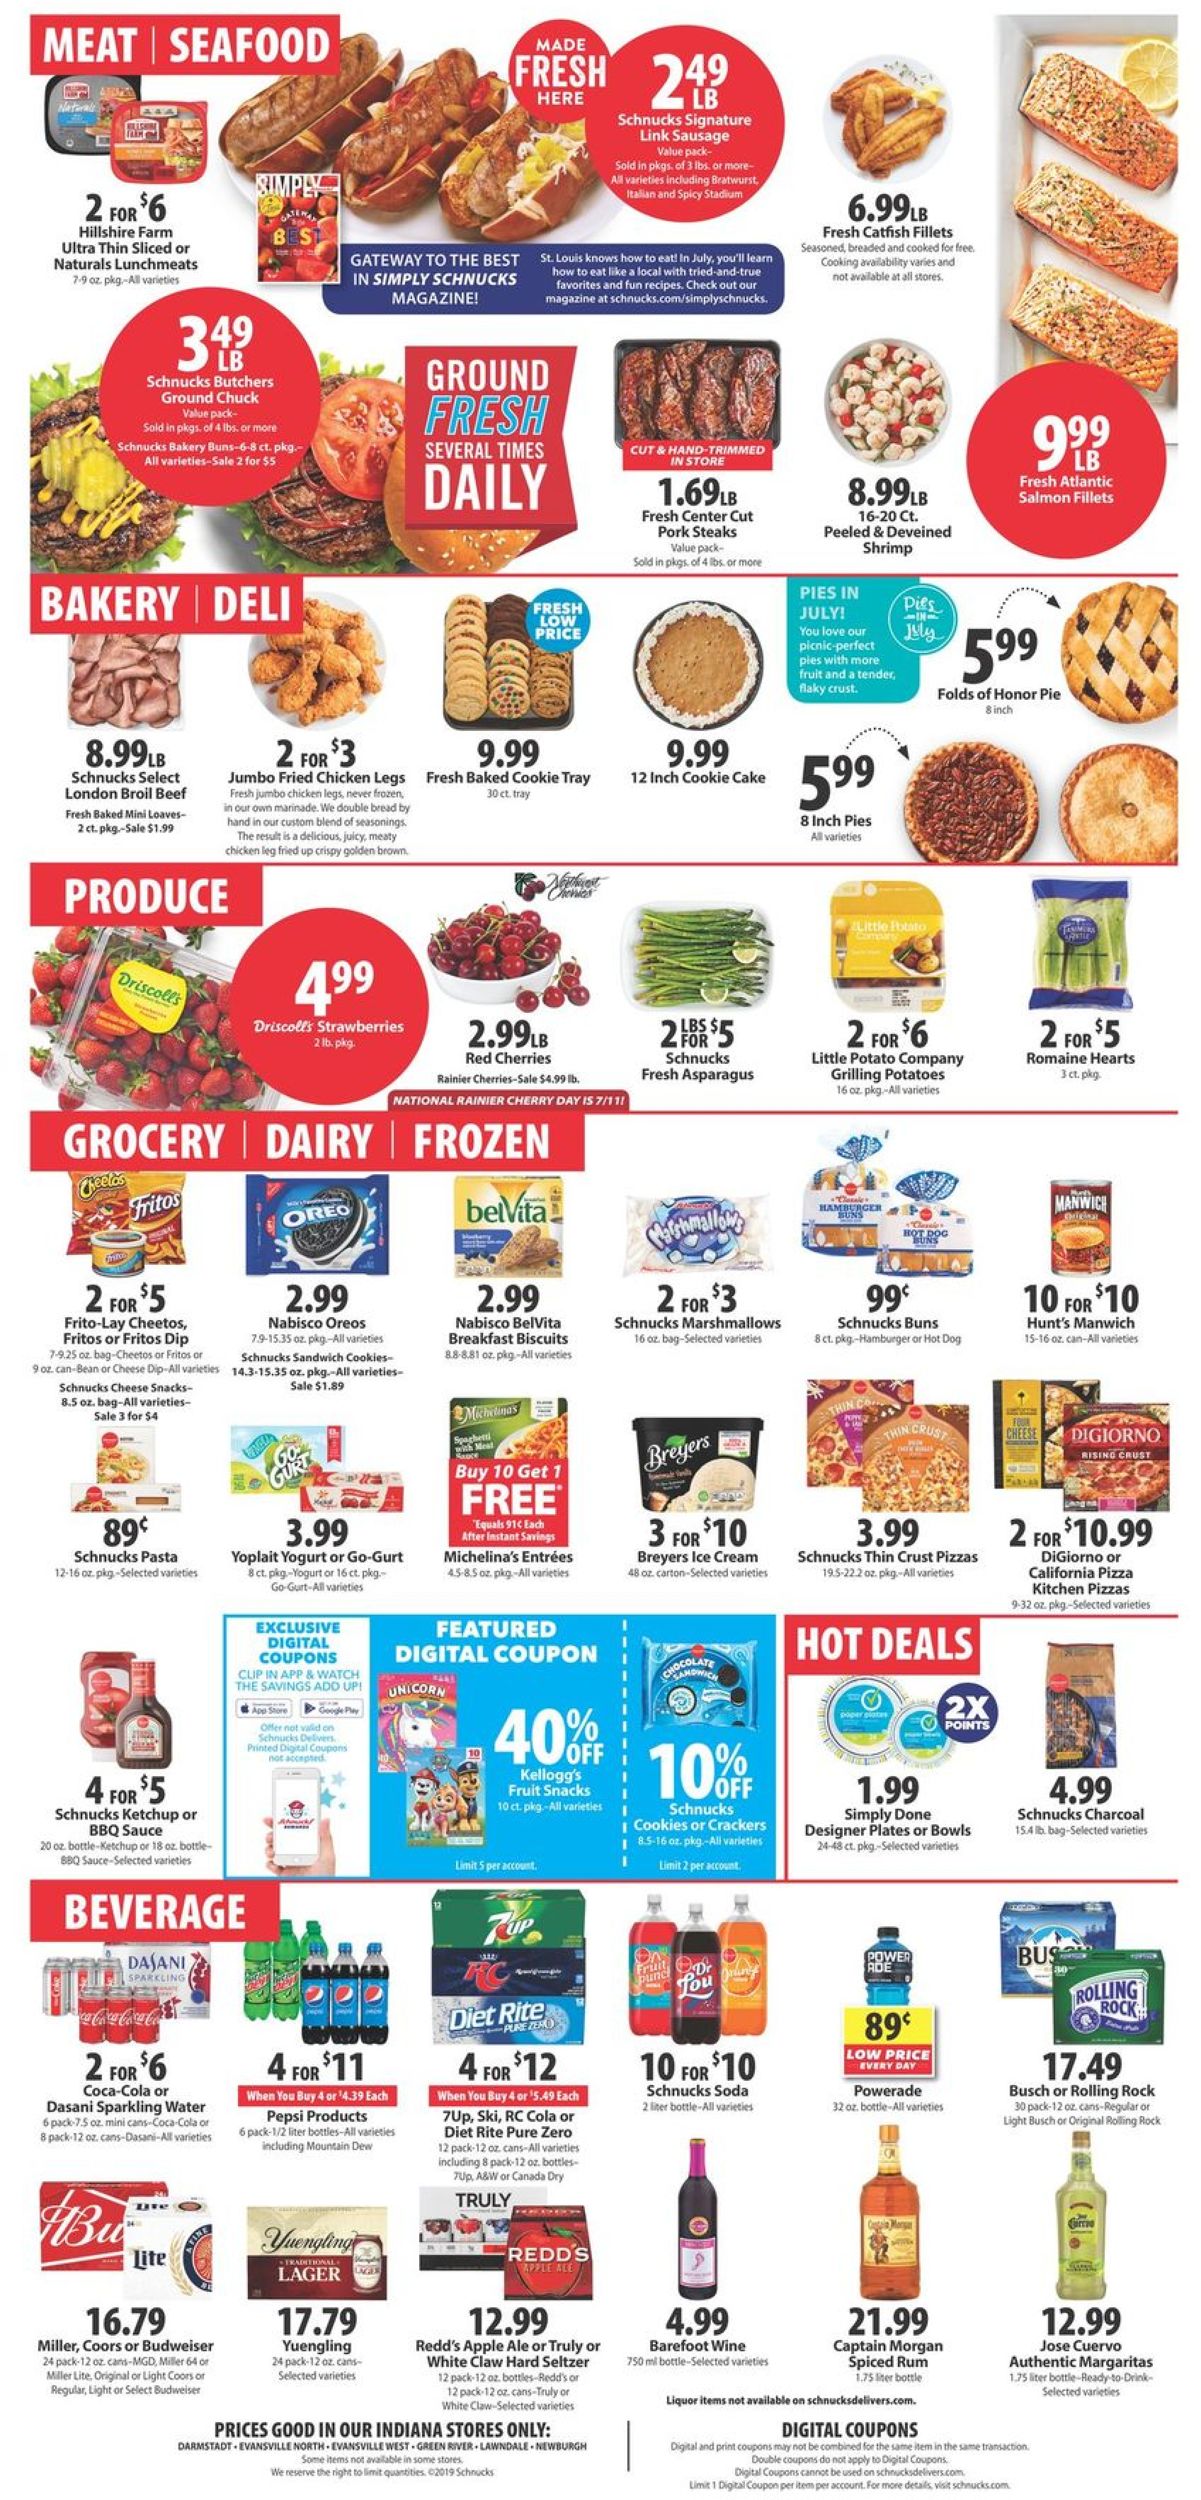 Schnucks Current weekly ad 07/05 - 07/09/2019 [2] - frequent-ads.com